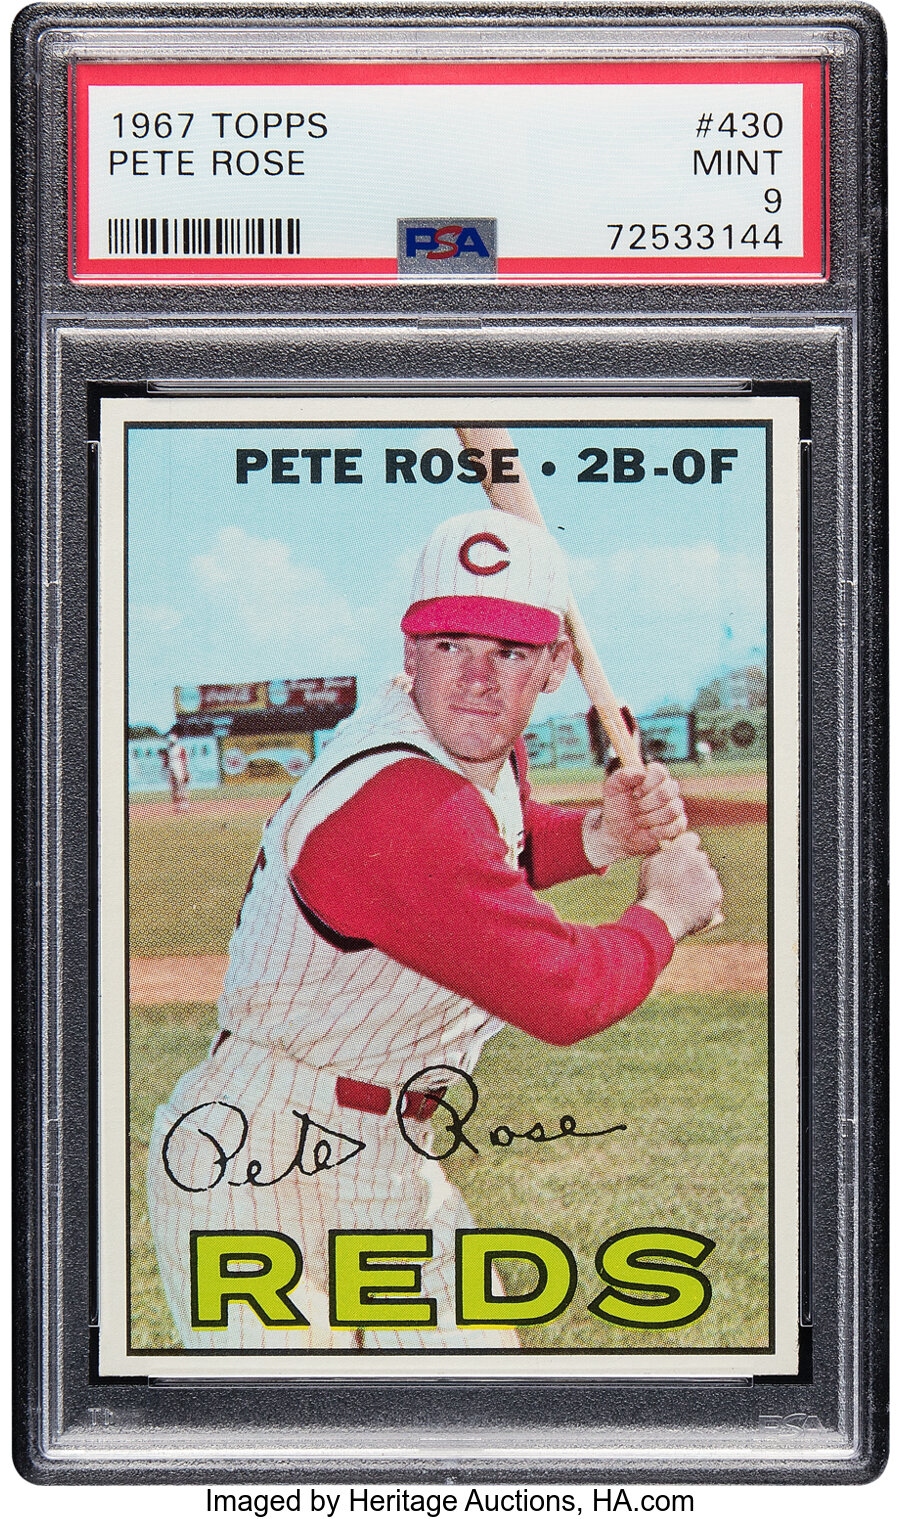 1967 Topps Pete Rose #430 PSA Mint 9 - Only One Higher